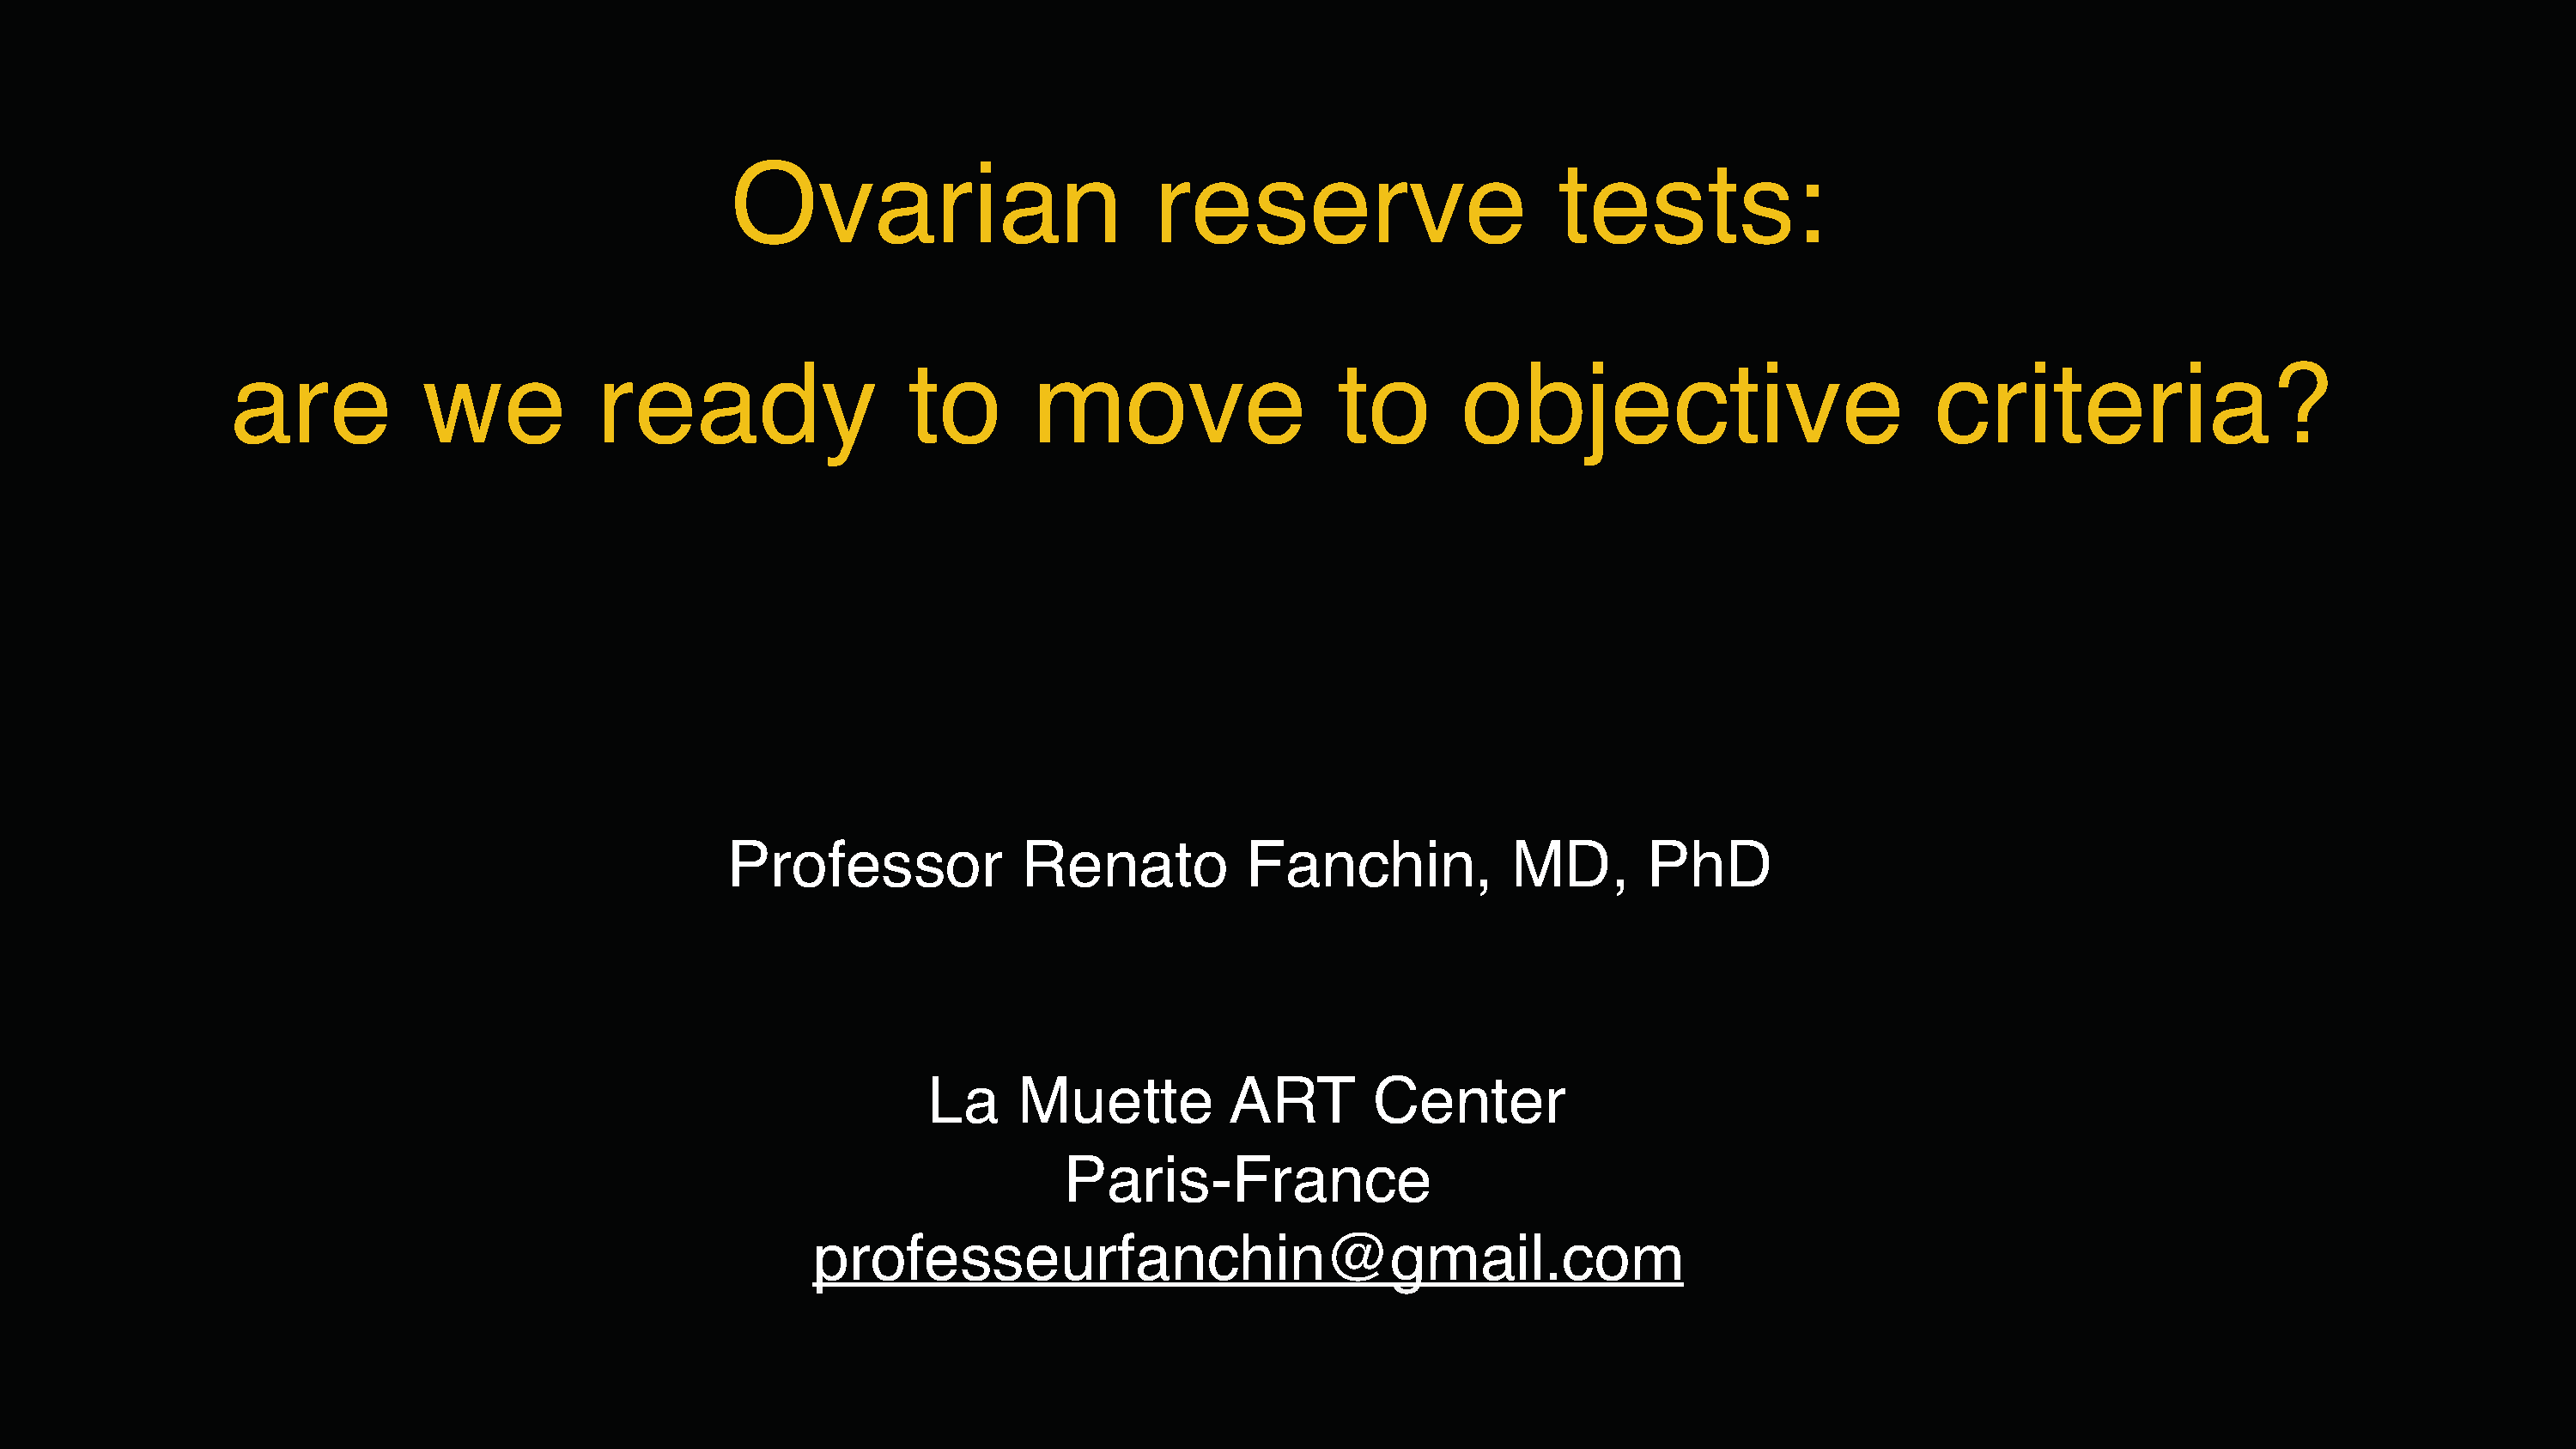 Ovarian reserve tests: are we ready to move to objective criteria?